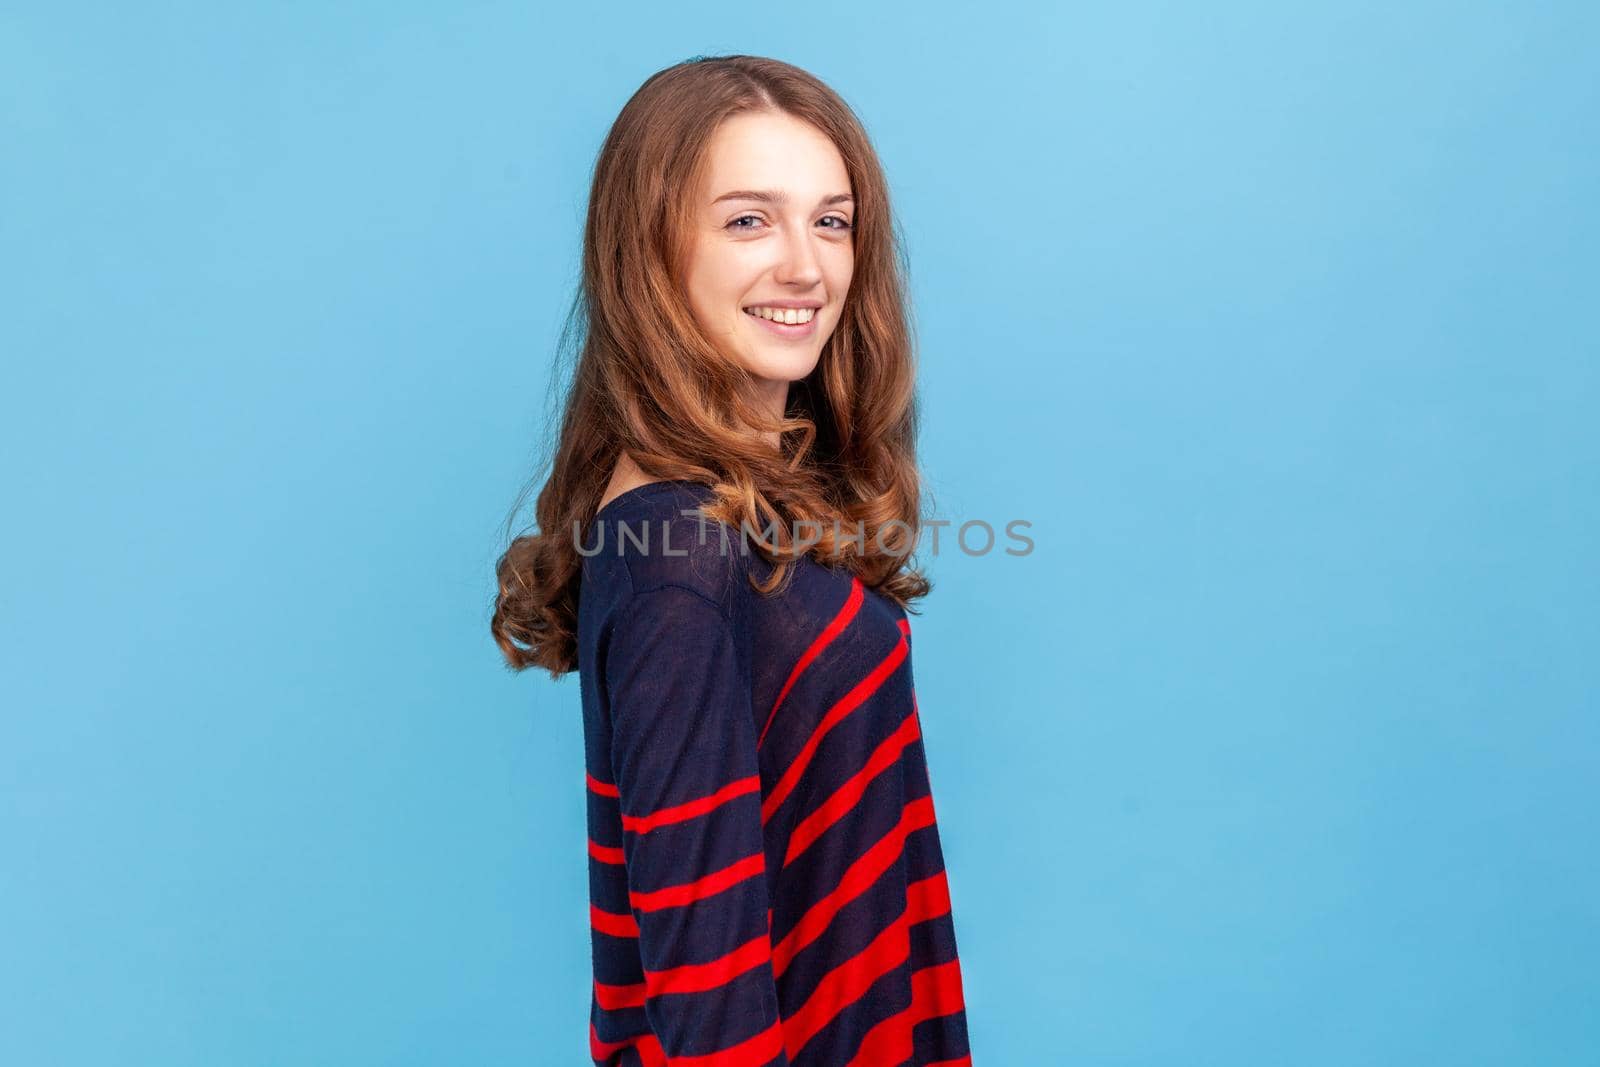 Side view of happy woman wearing striped casual style sweater standing and looking at camera with toothy smile, satisfied expression. Indoor studio shot isolated on blue background.